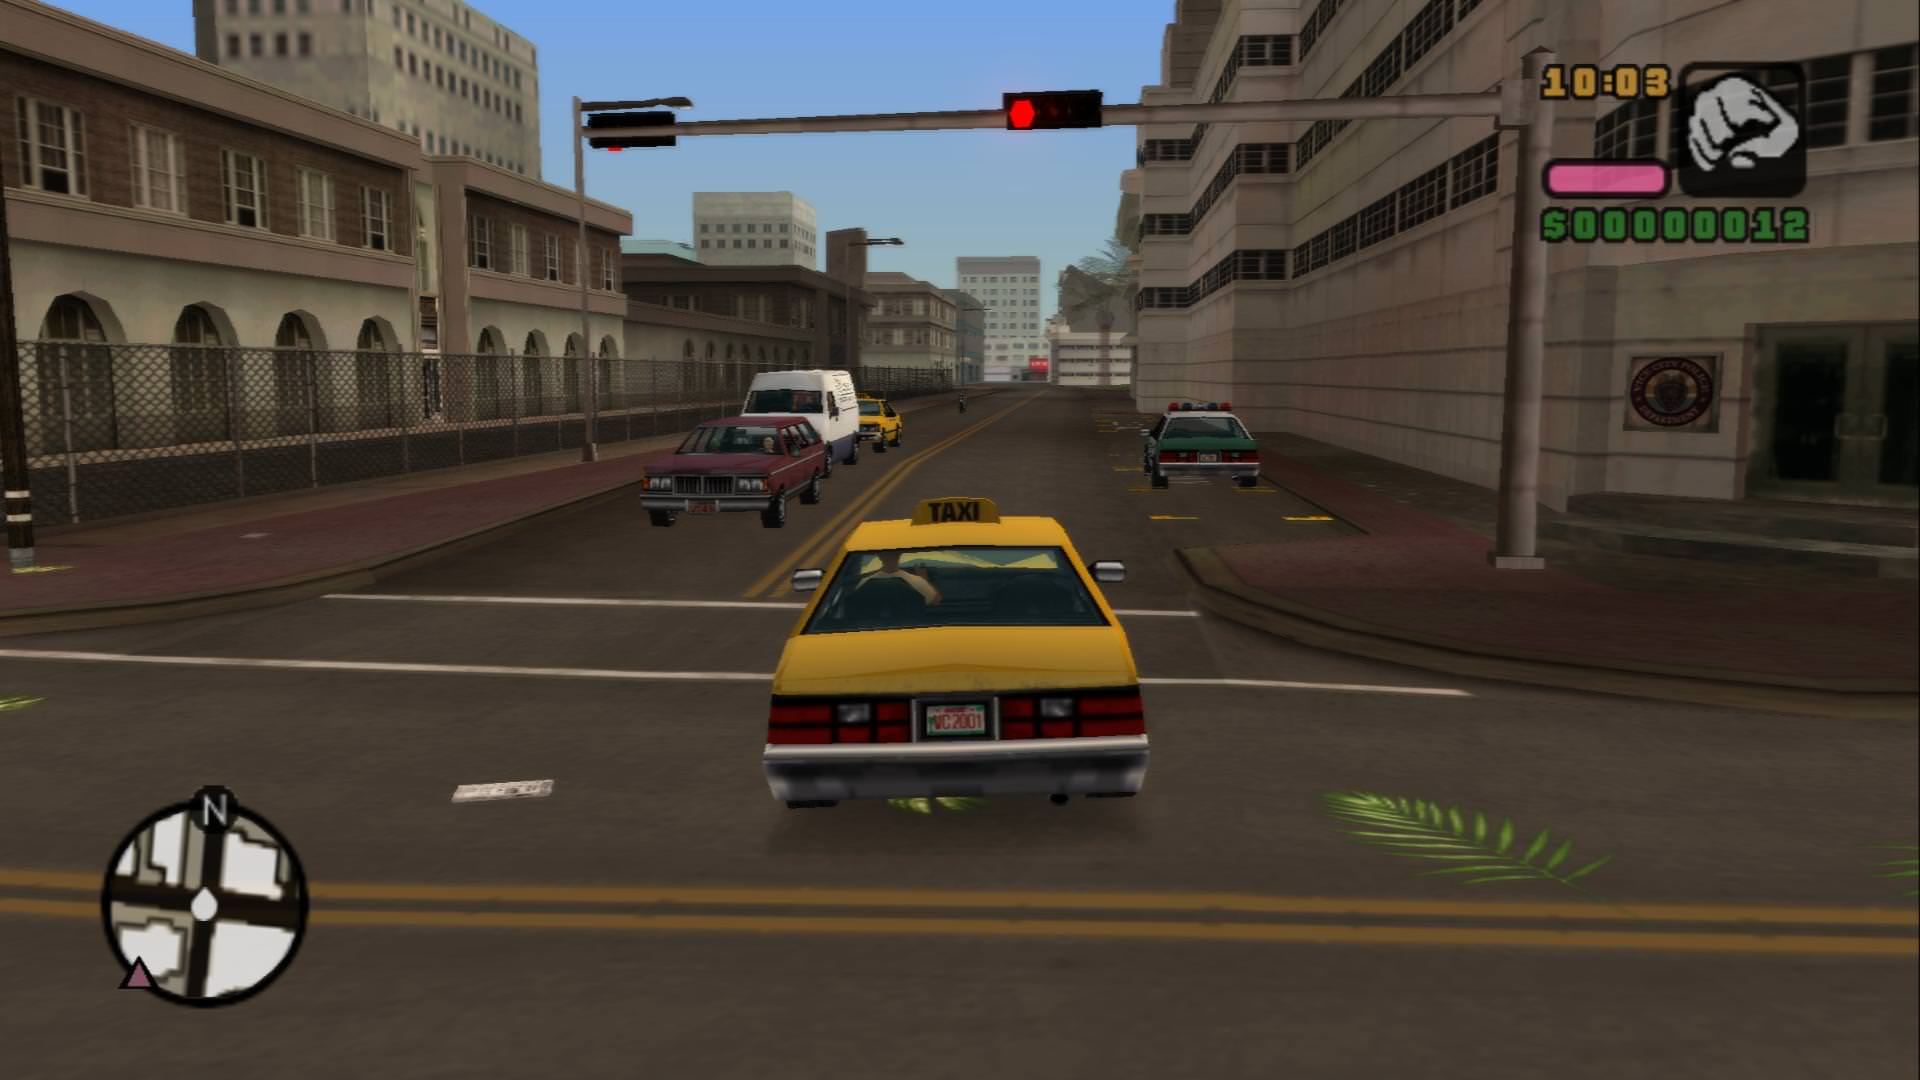 Gta vice city stories game free download